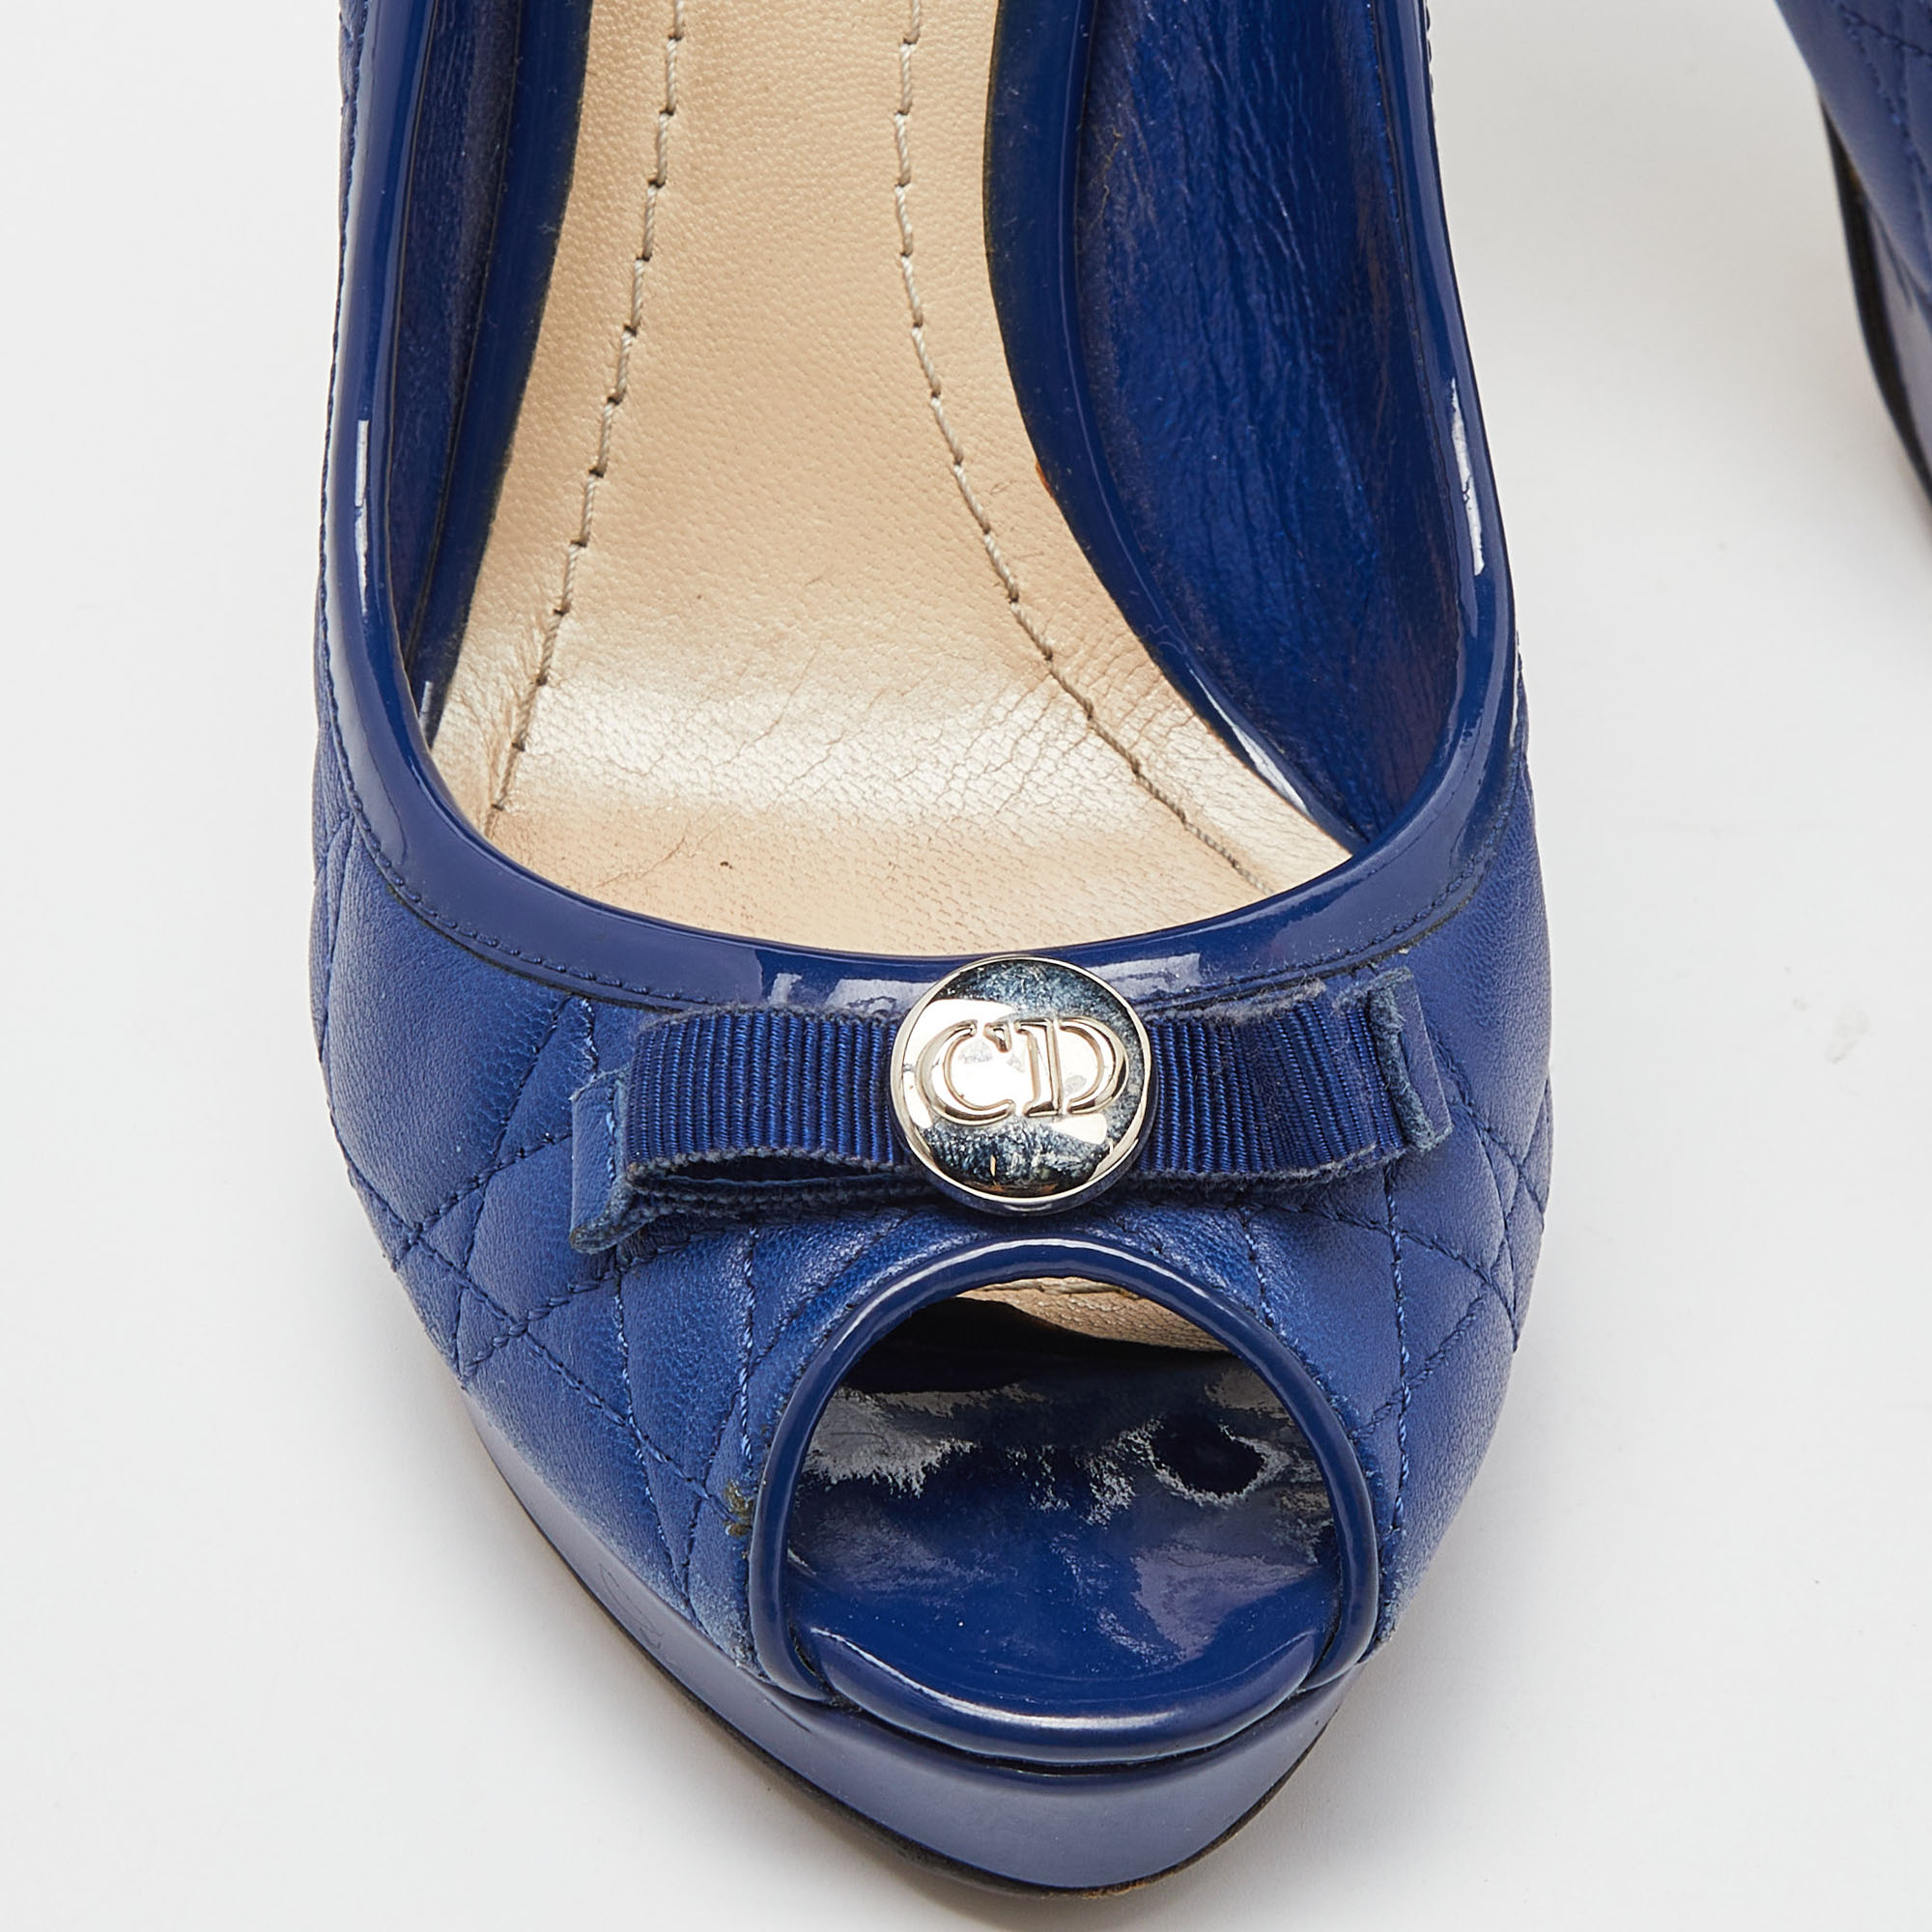 Dior Blue Cannage Leather And Patent Bow Peep Toe Platform Pumps Size 36.5